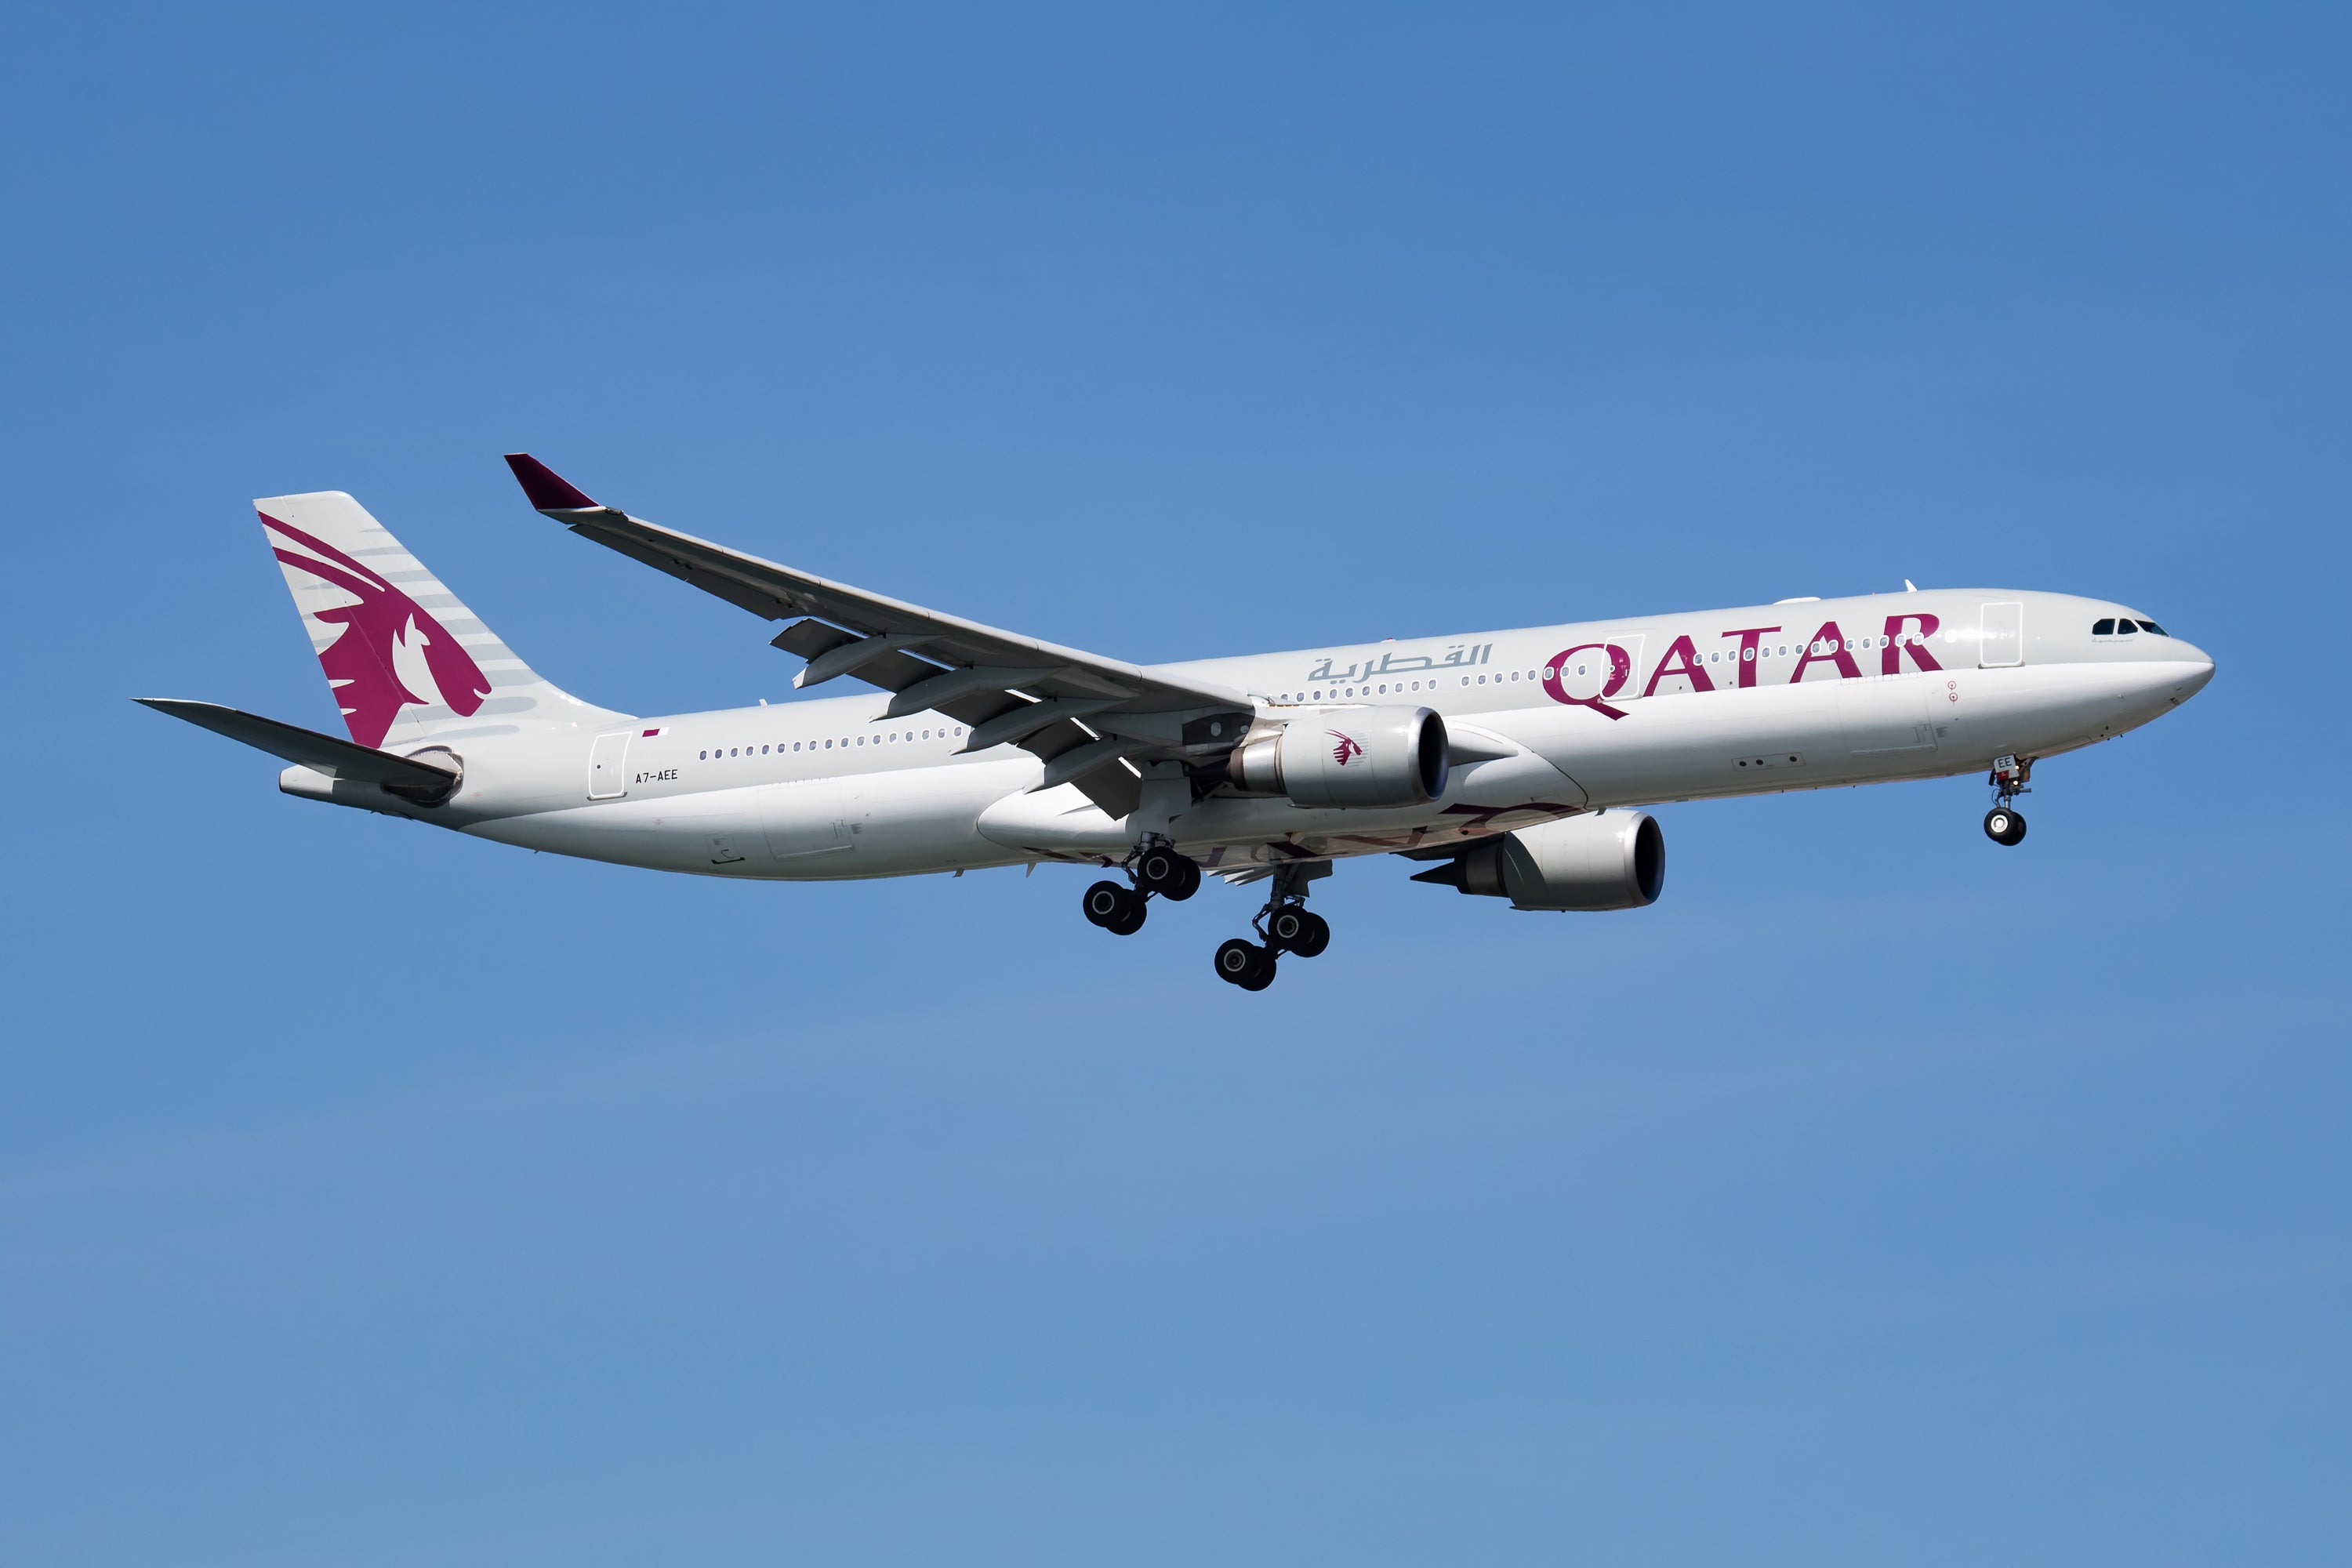 This incident happened onboard a Qatar Airways flight from Doha to Copenhagen in January